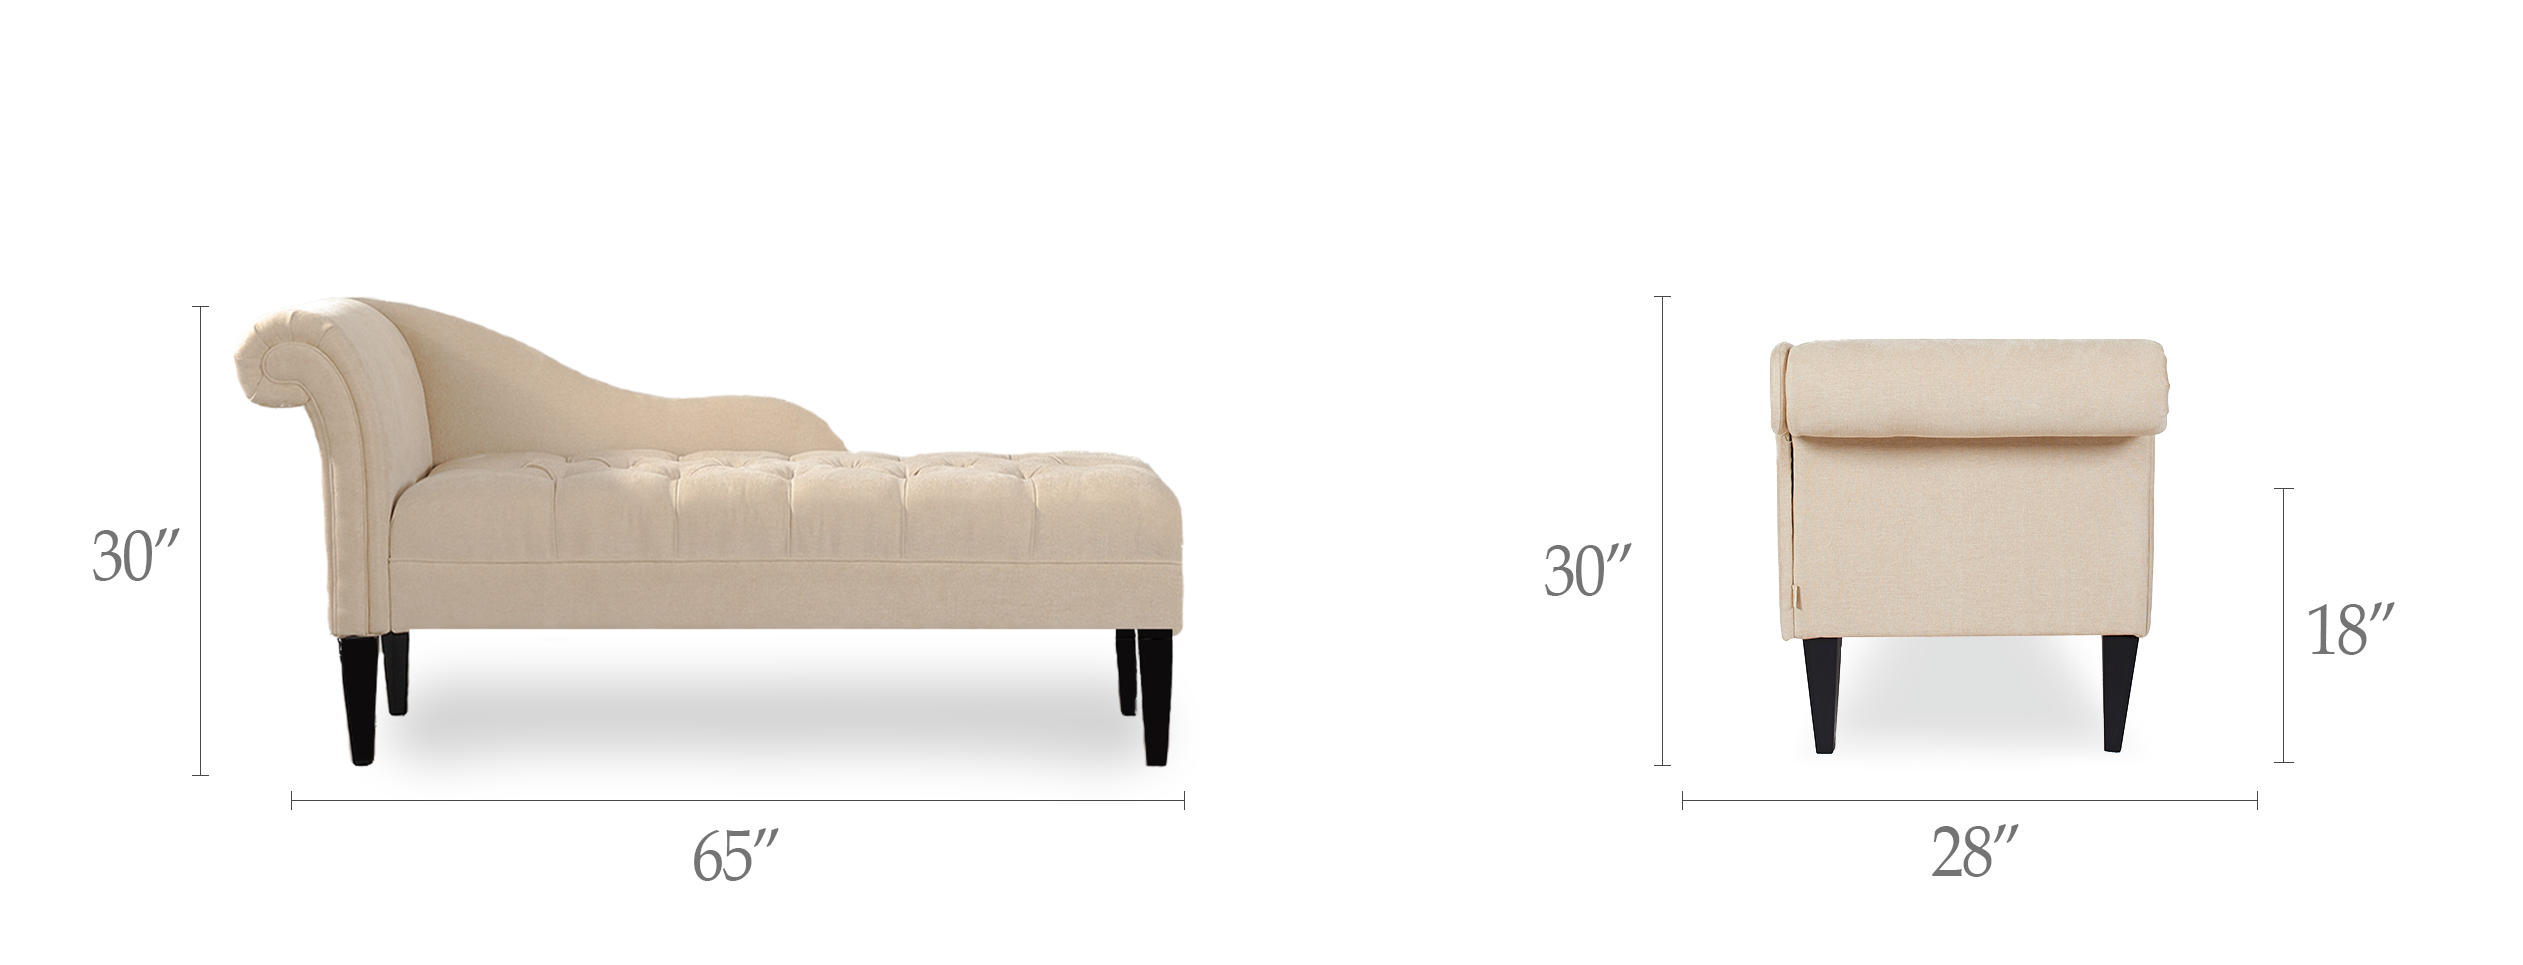 Harrison Tufted Chaise Lounge